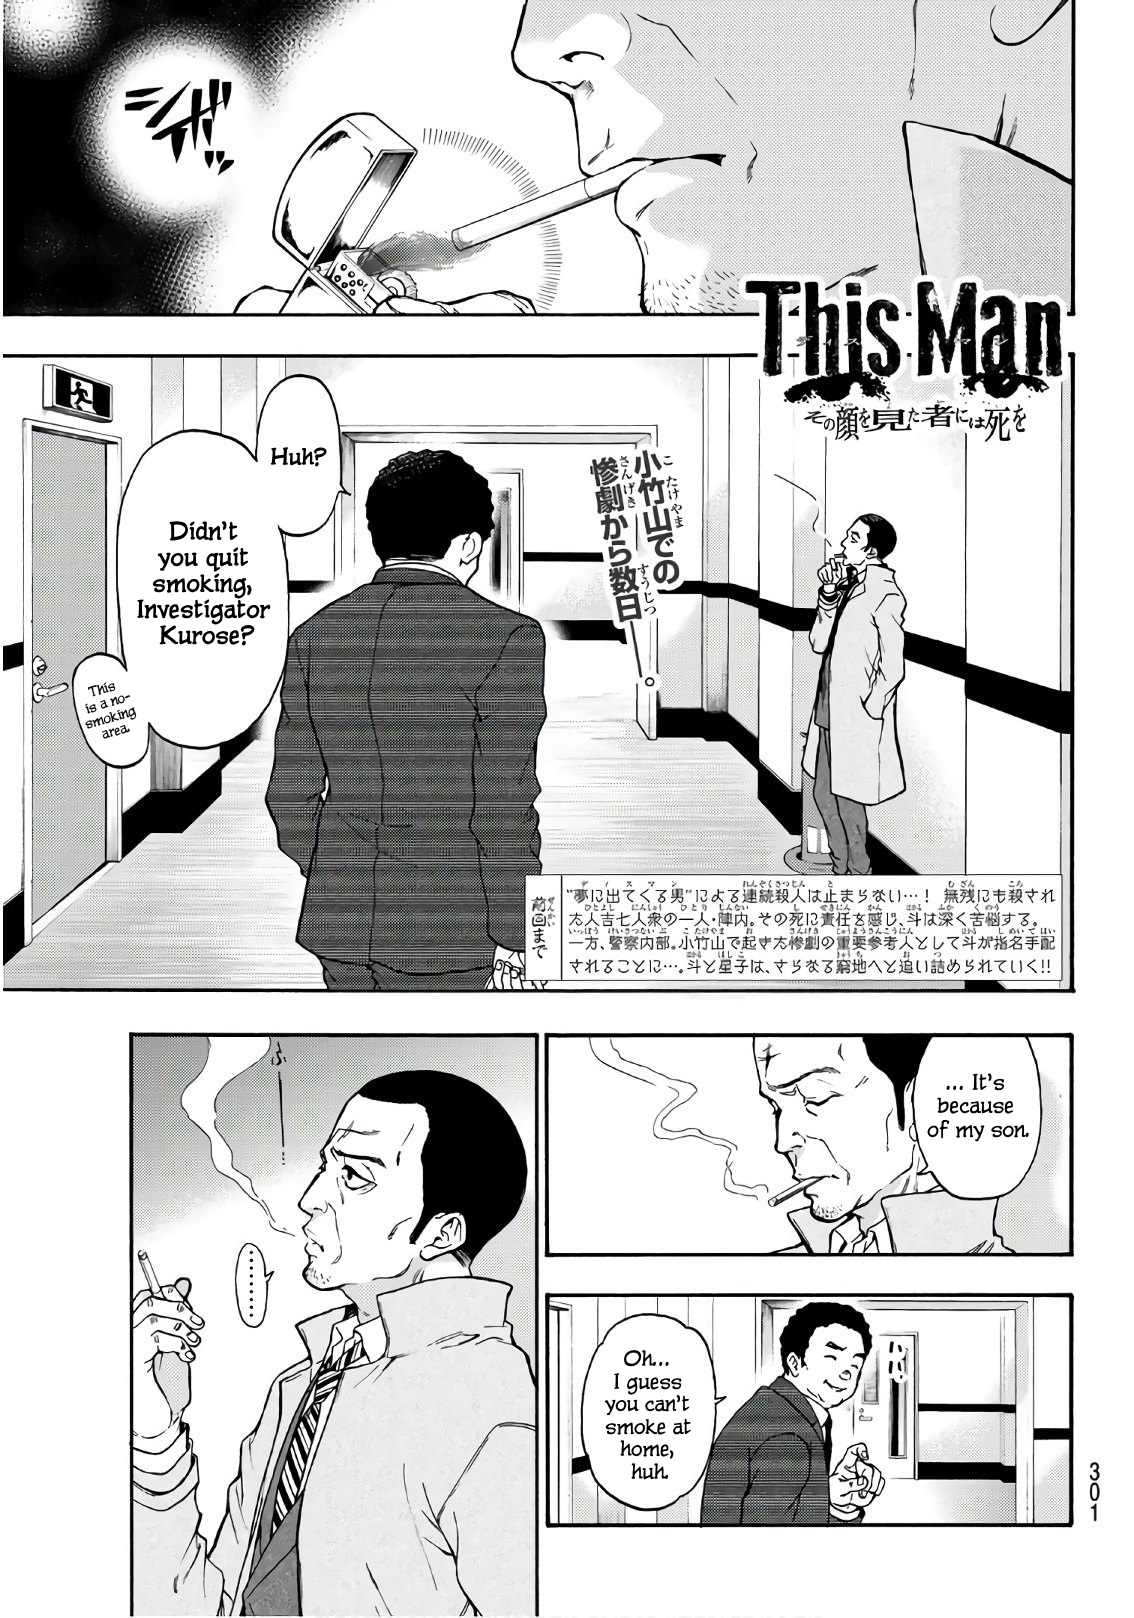 This Man - Page 1